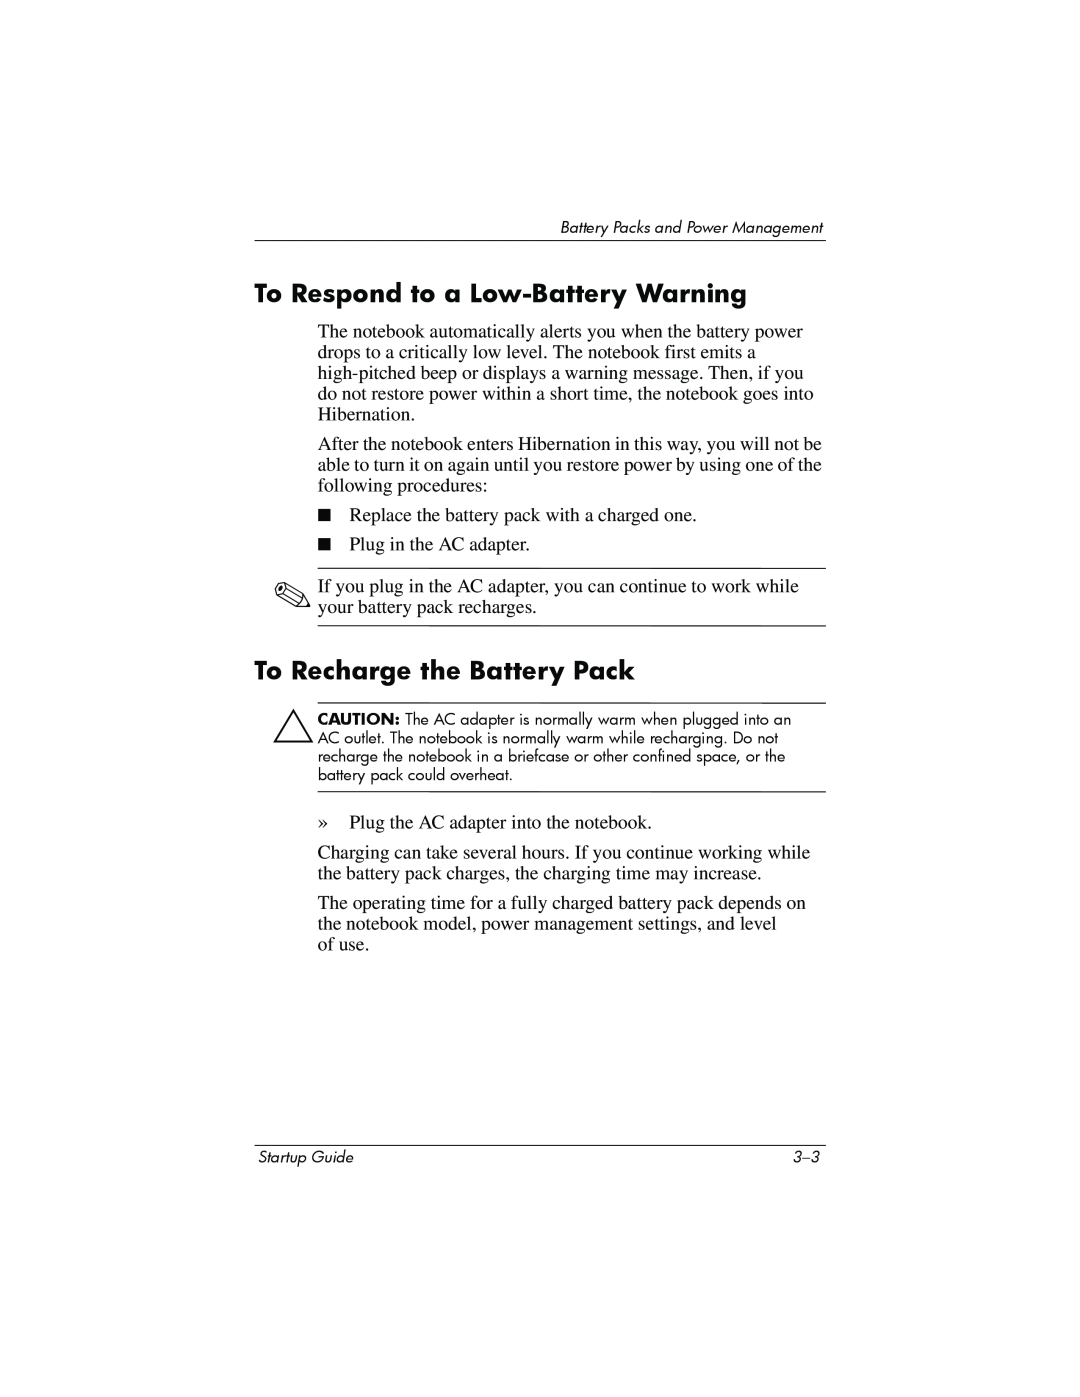 Compaq Personal Computer manual To Respond to a Low-Battery Warning, To Recharge the Battery Pack 